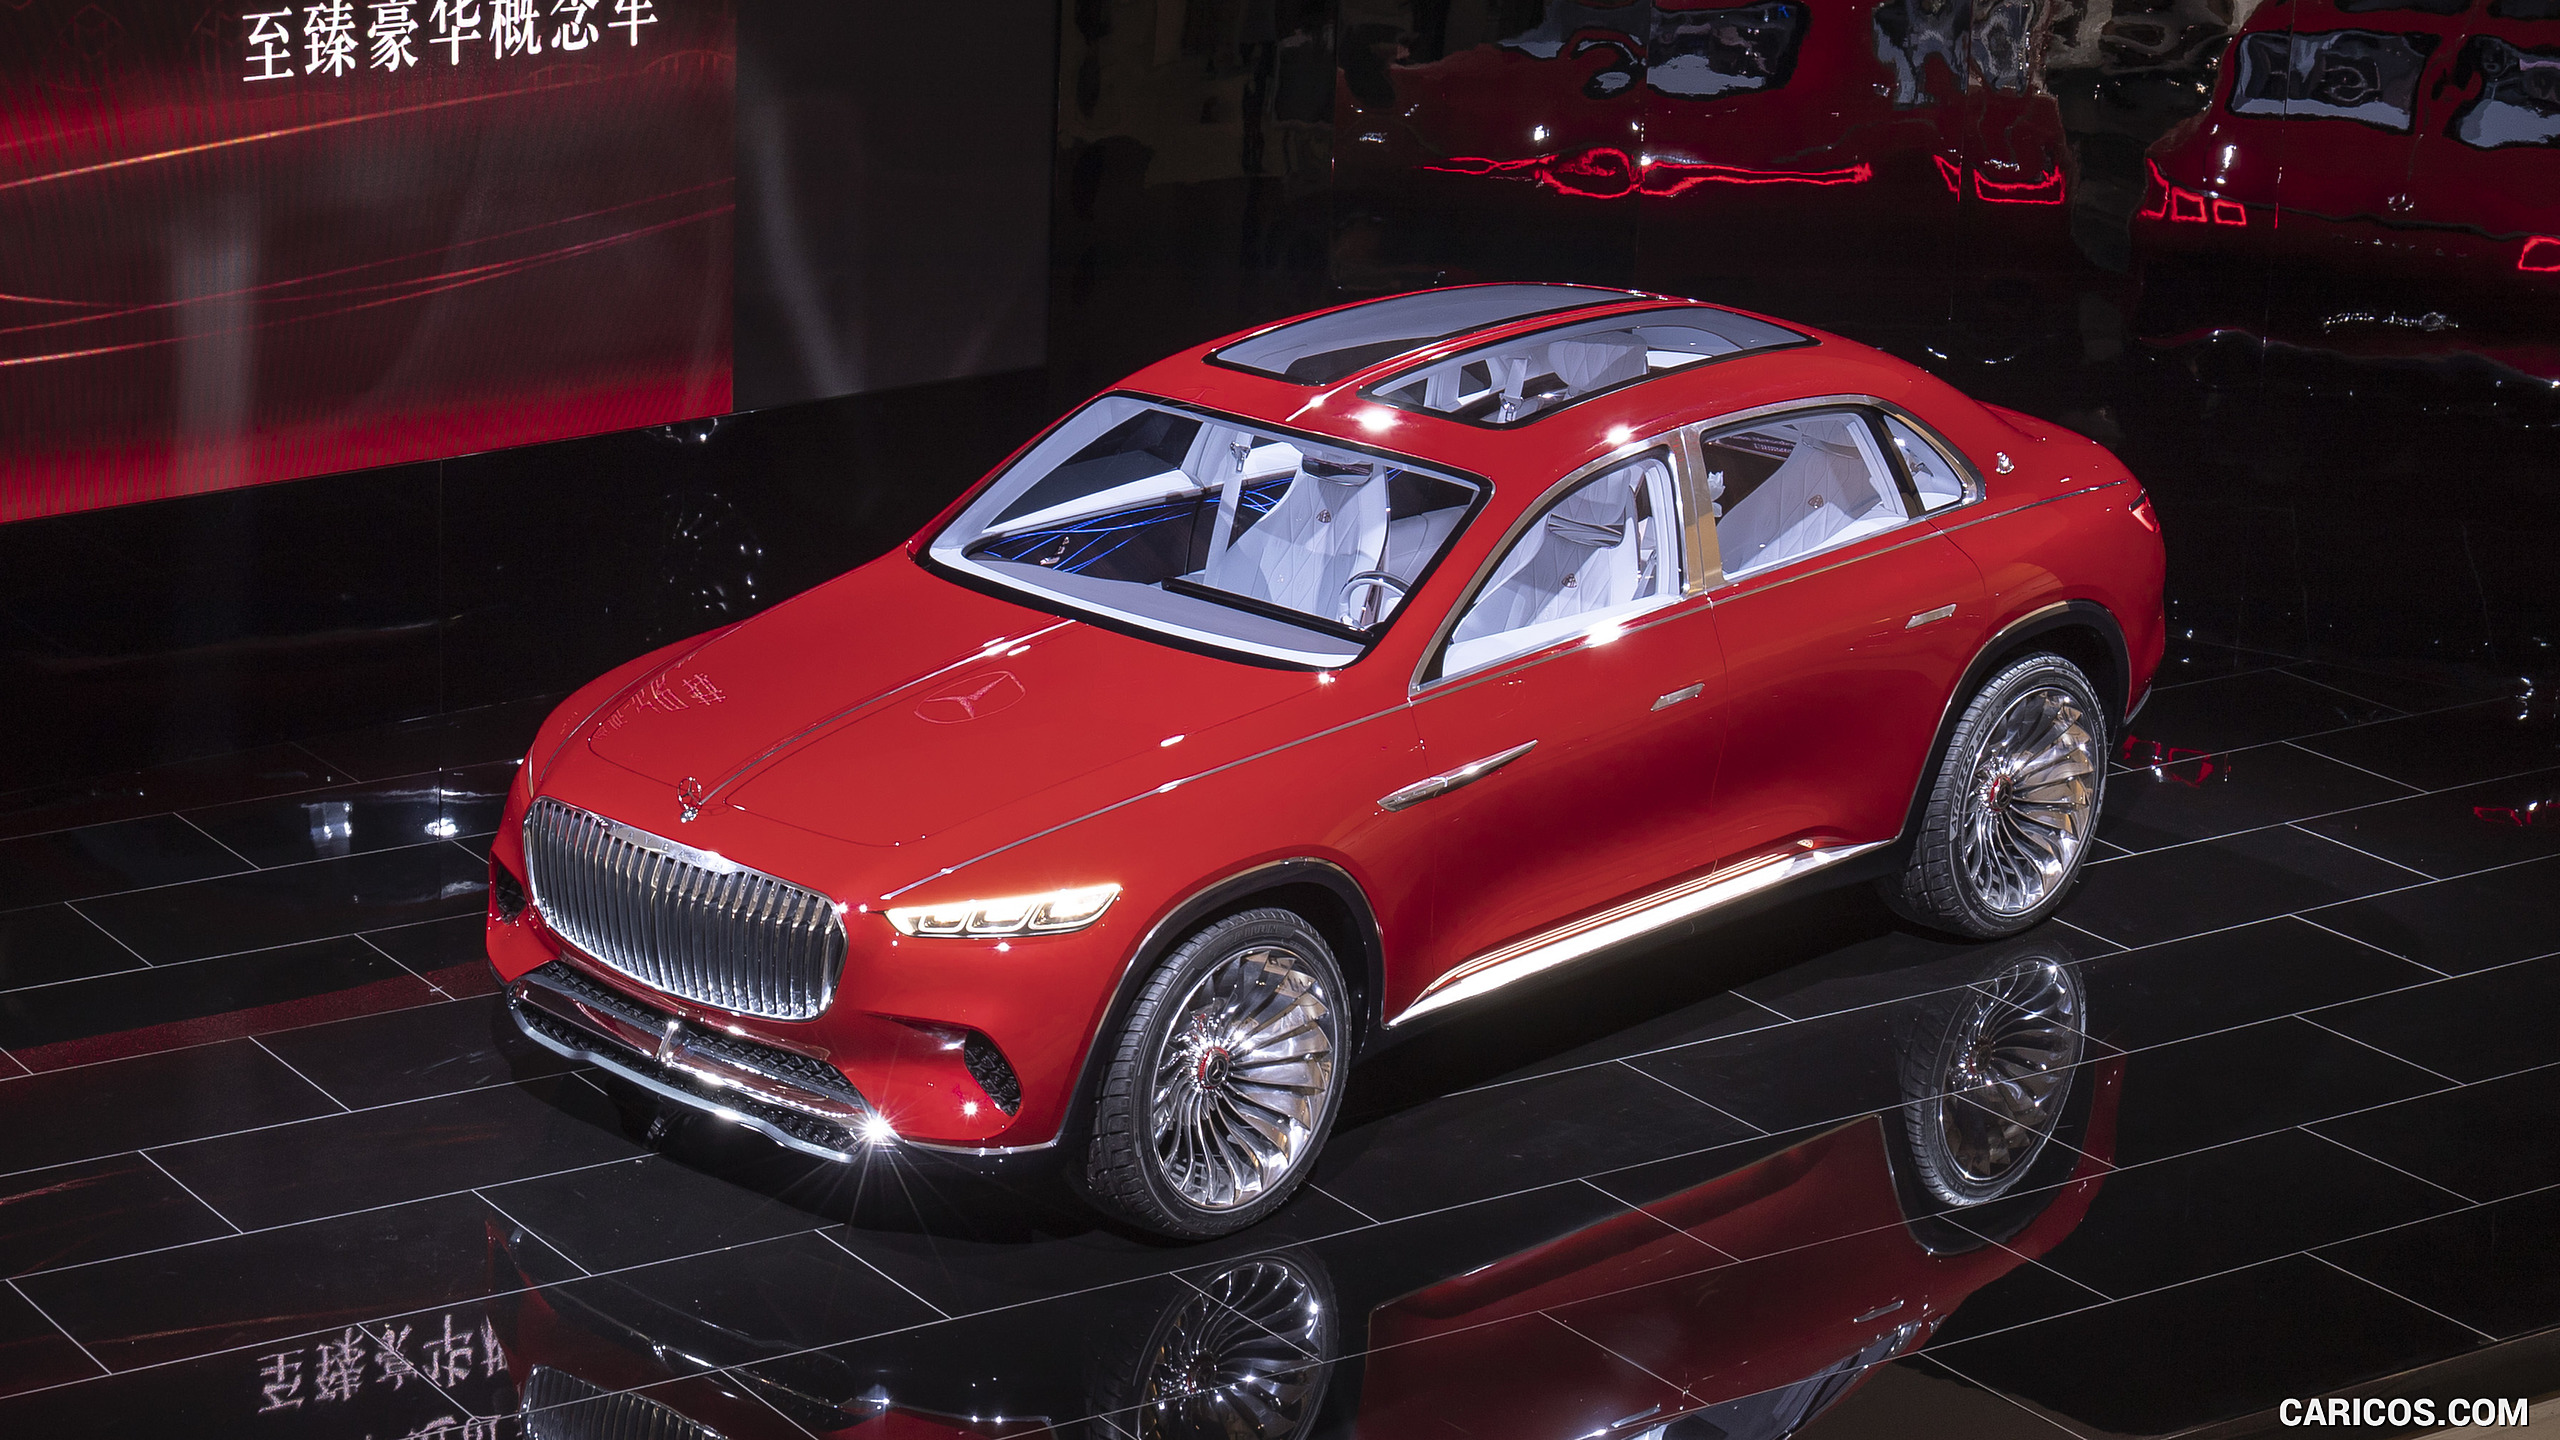 2018 Mercedes-Maybach Vision Ultimate Luxury SUV Concept - Front Three-Quarter, #13 of 41